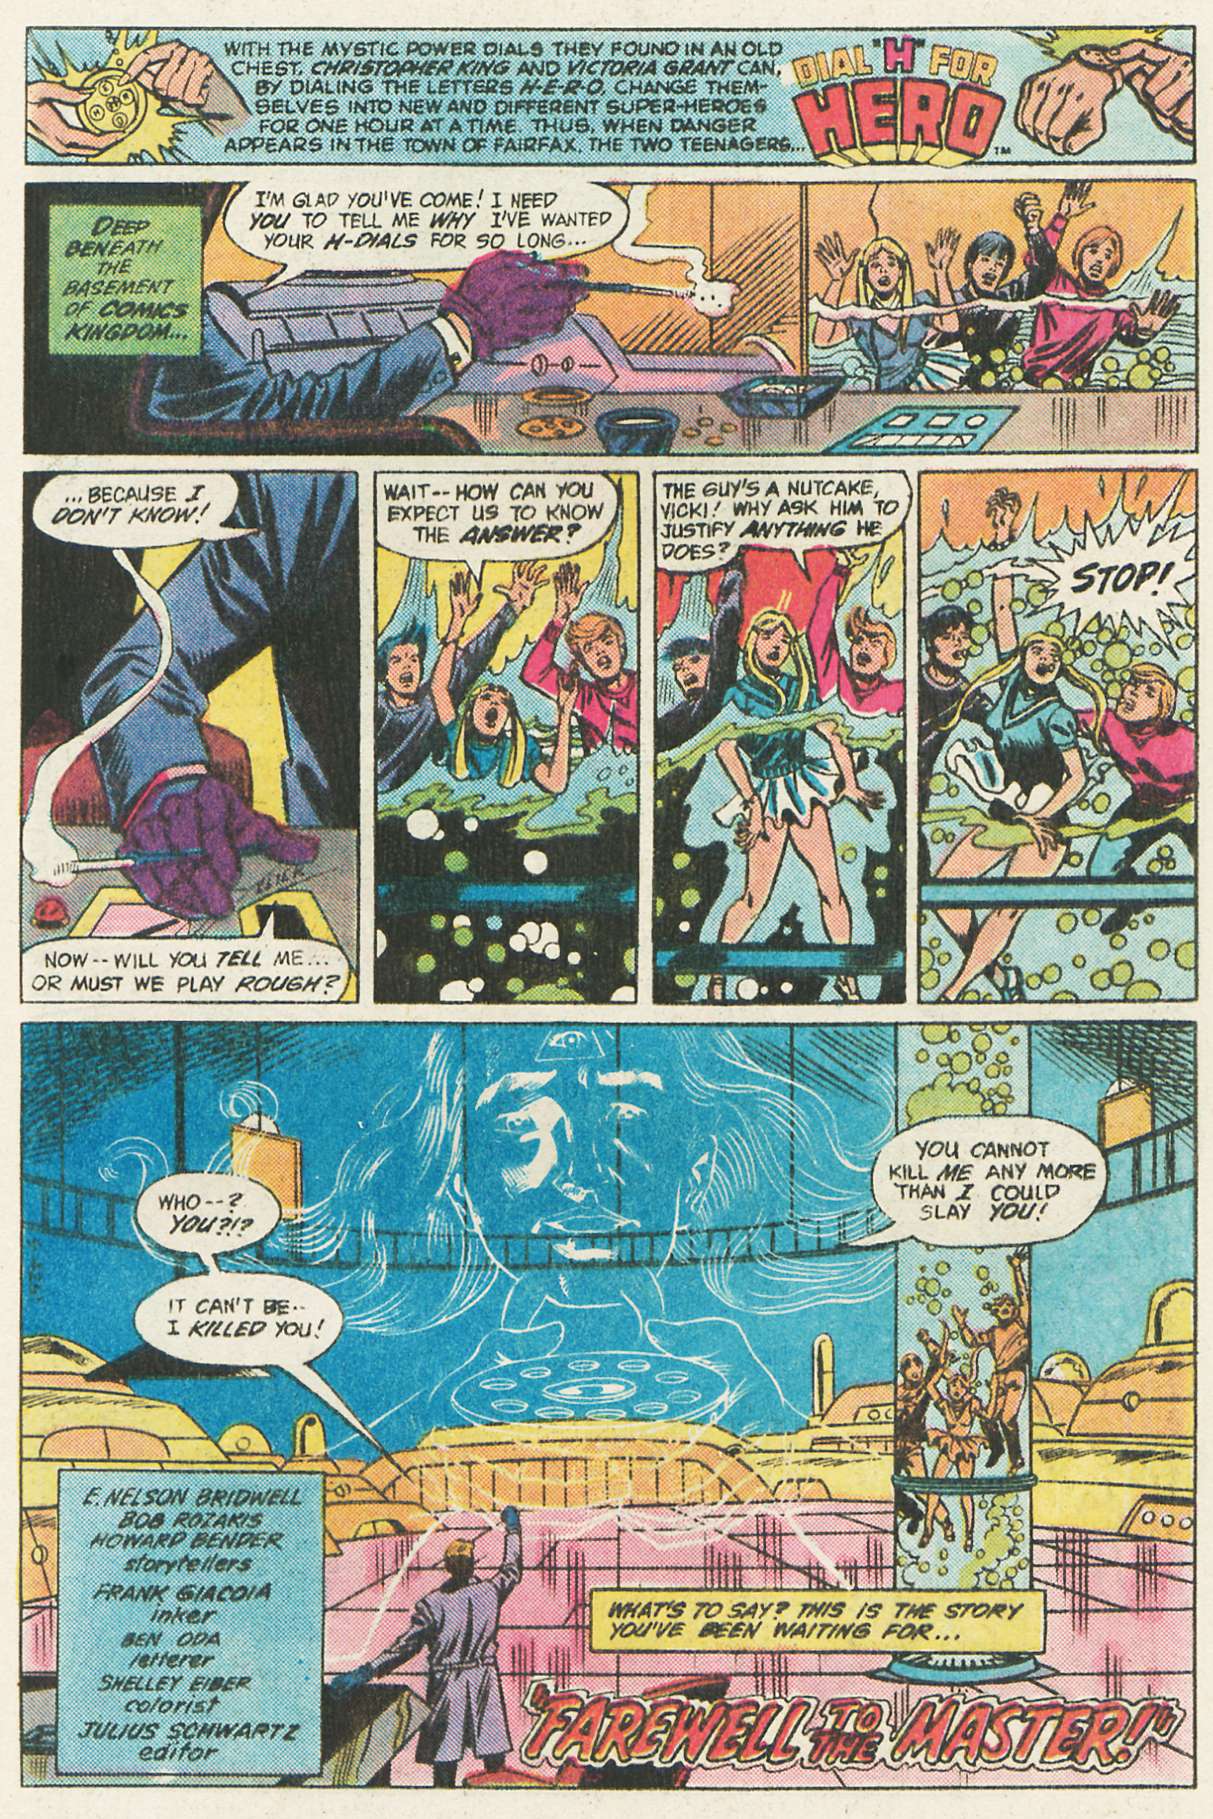 The New Adventures of Superboy 49 Page 17